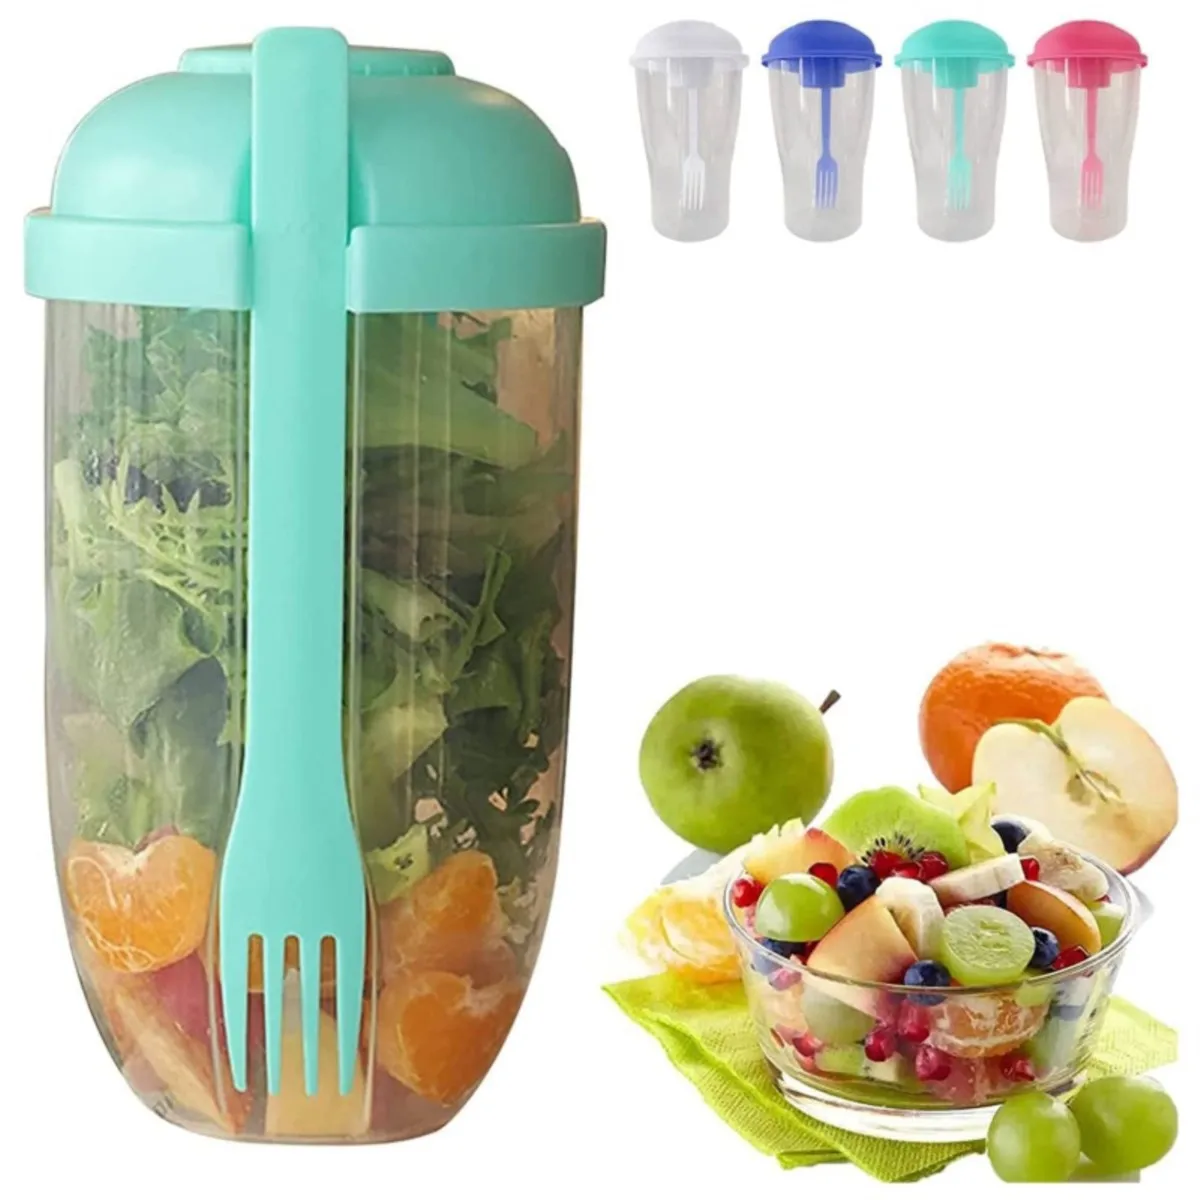 

Fresh Salad Cup Keep Fit Salad Meal Shaker Cup with Fork Salad Dressing Holder Portable Fruit and Vegetable Salad Cup Container